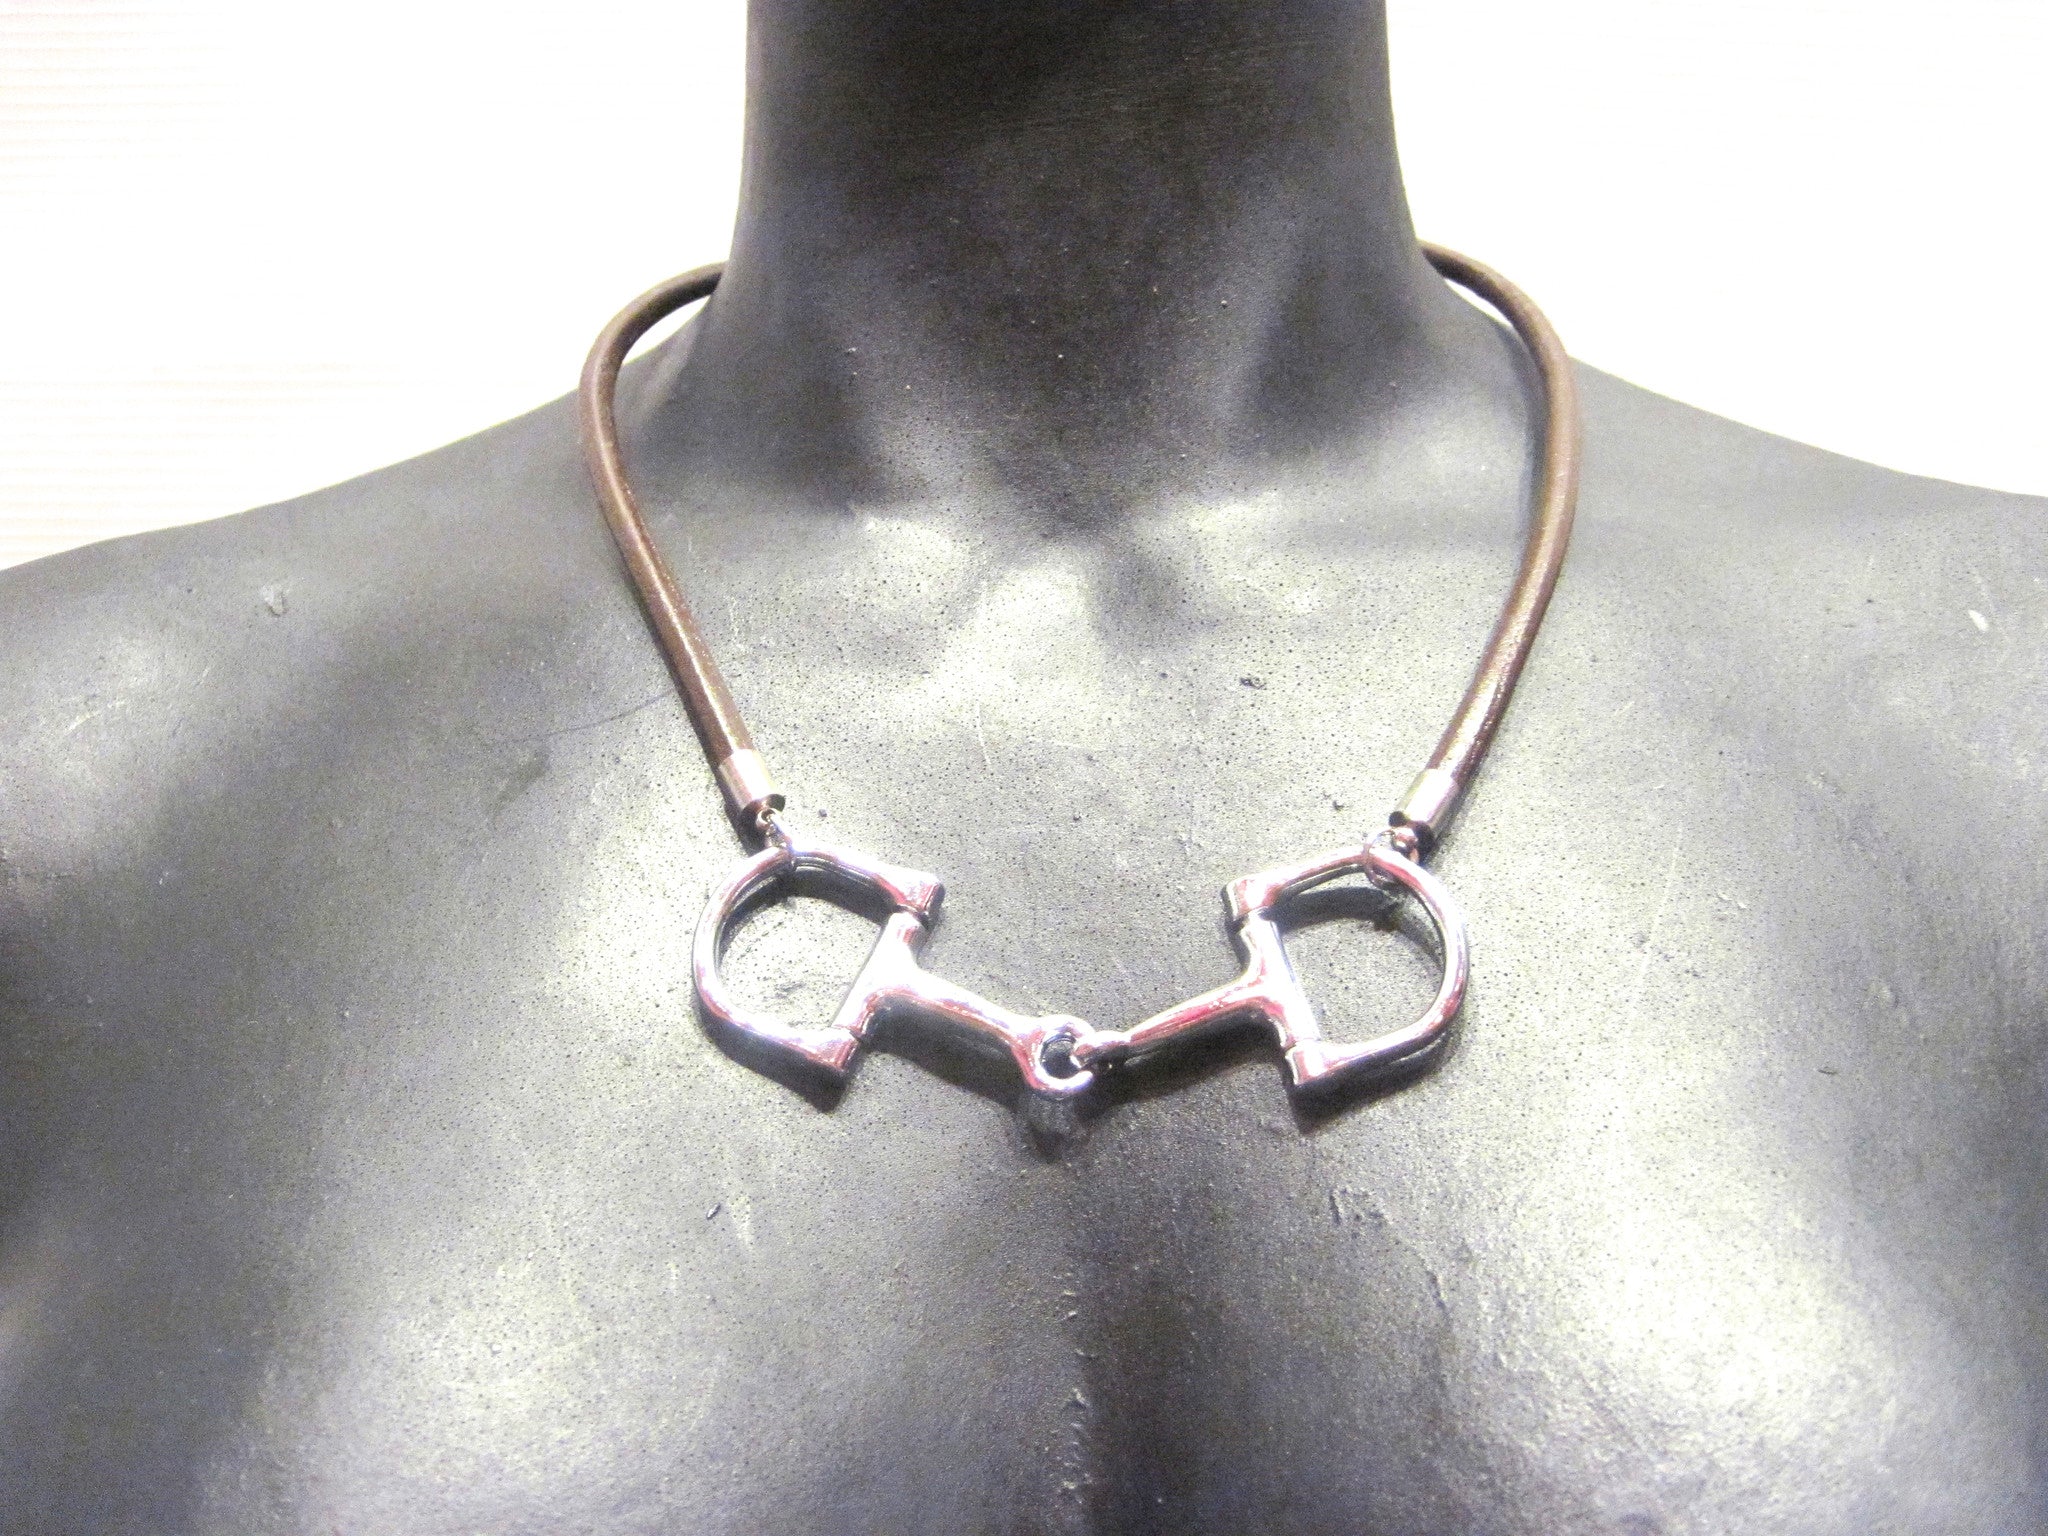 equestrian horse bit choker necklace by nyet jewelry.